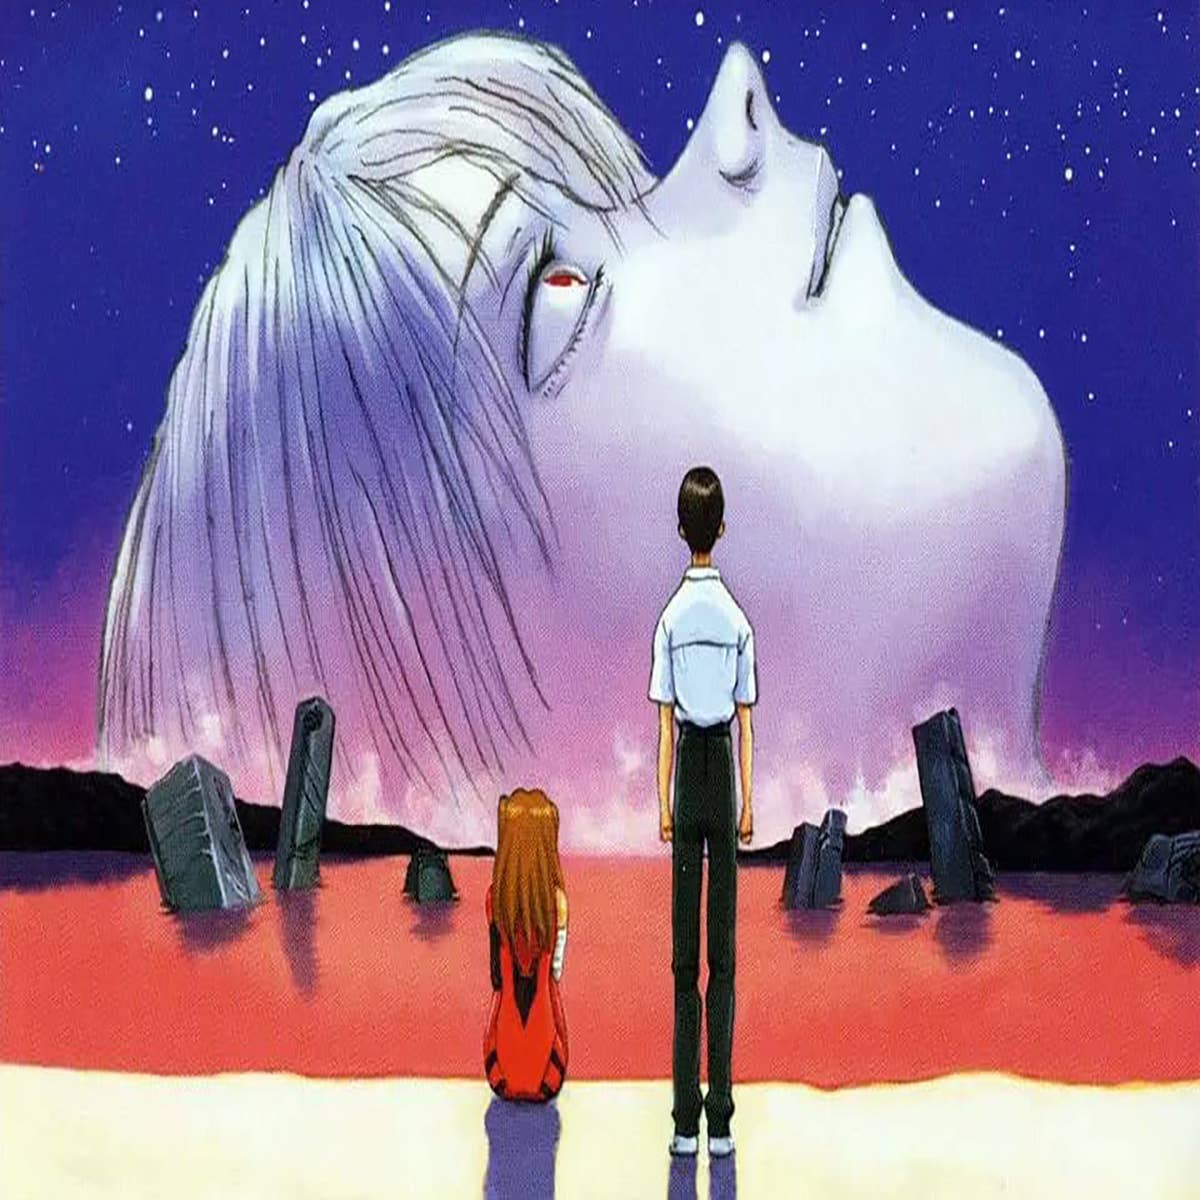 Neon Genesis Evangelion: How to watch the mecha anime series in  chronological and release order